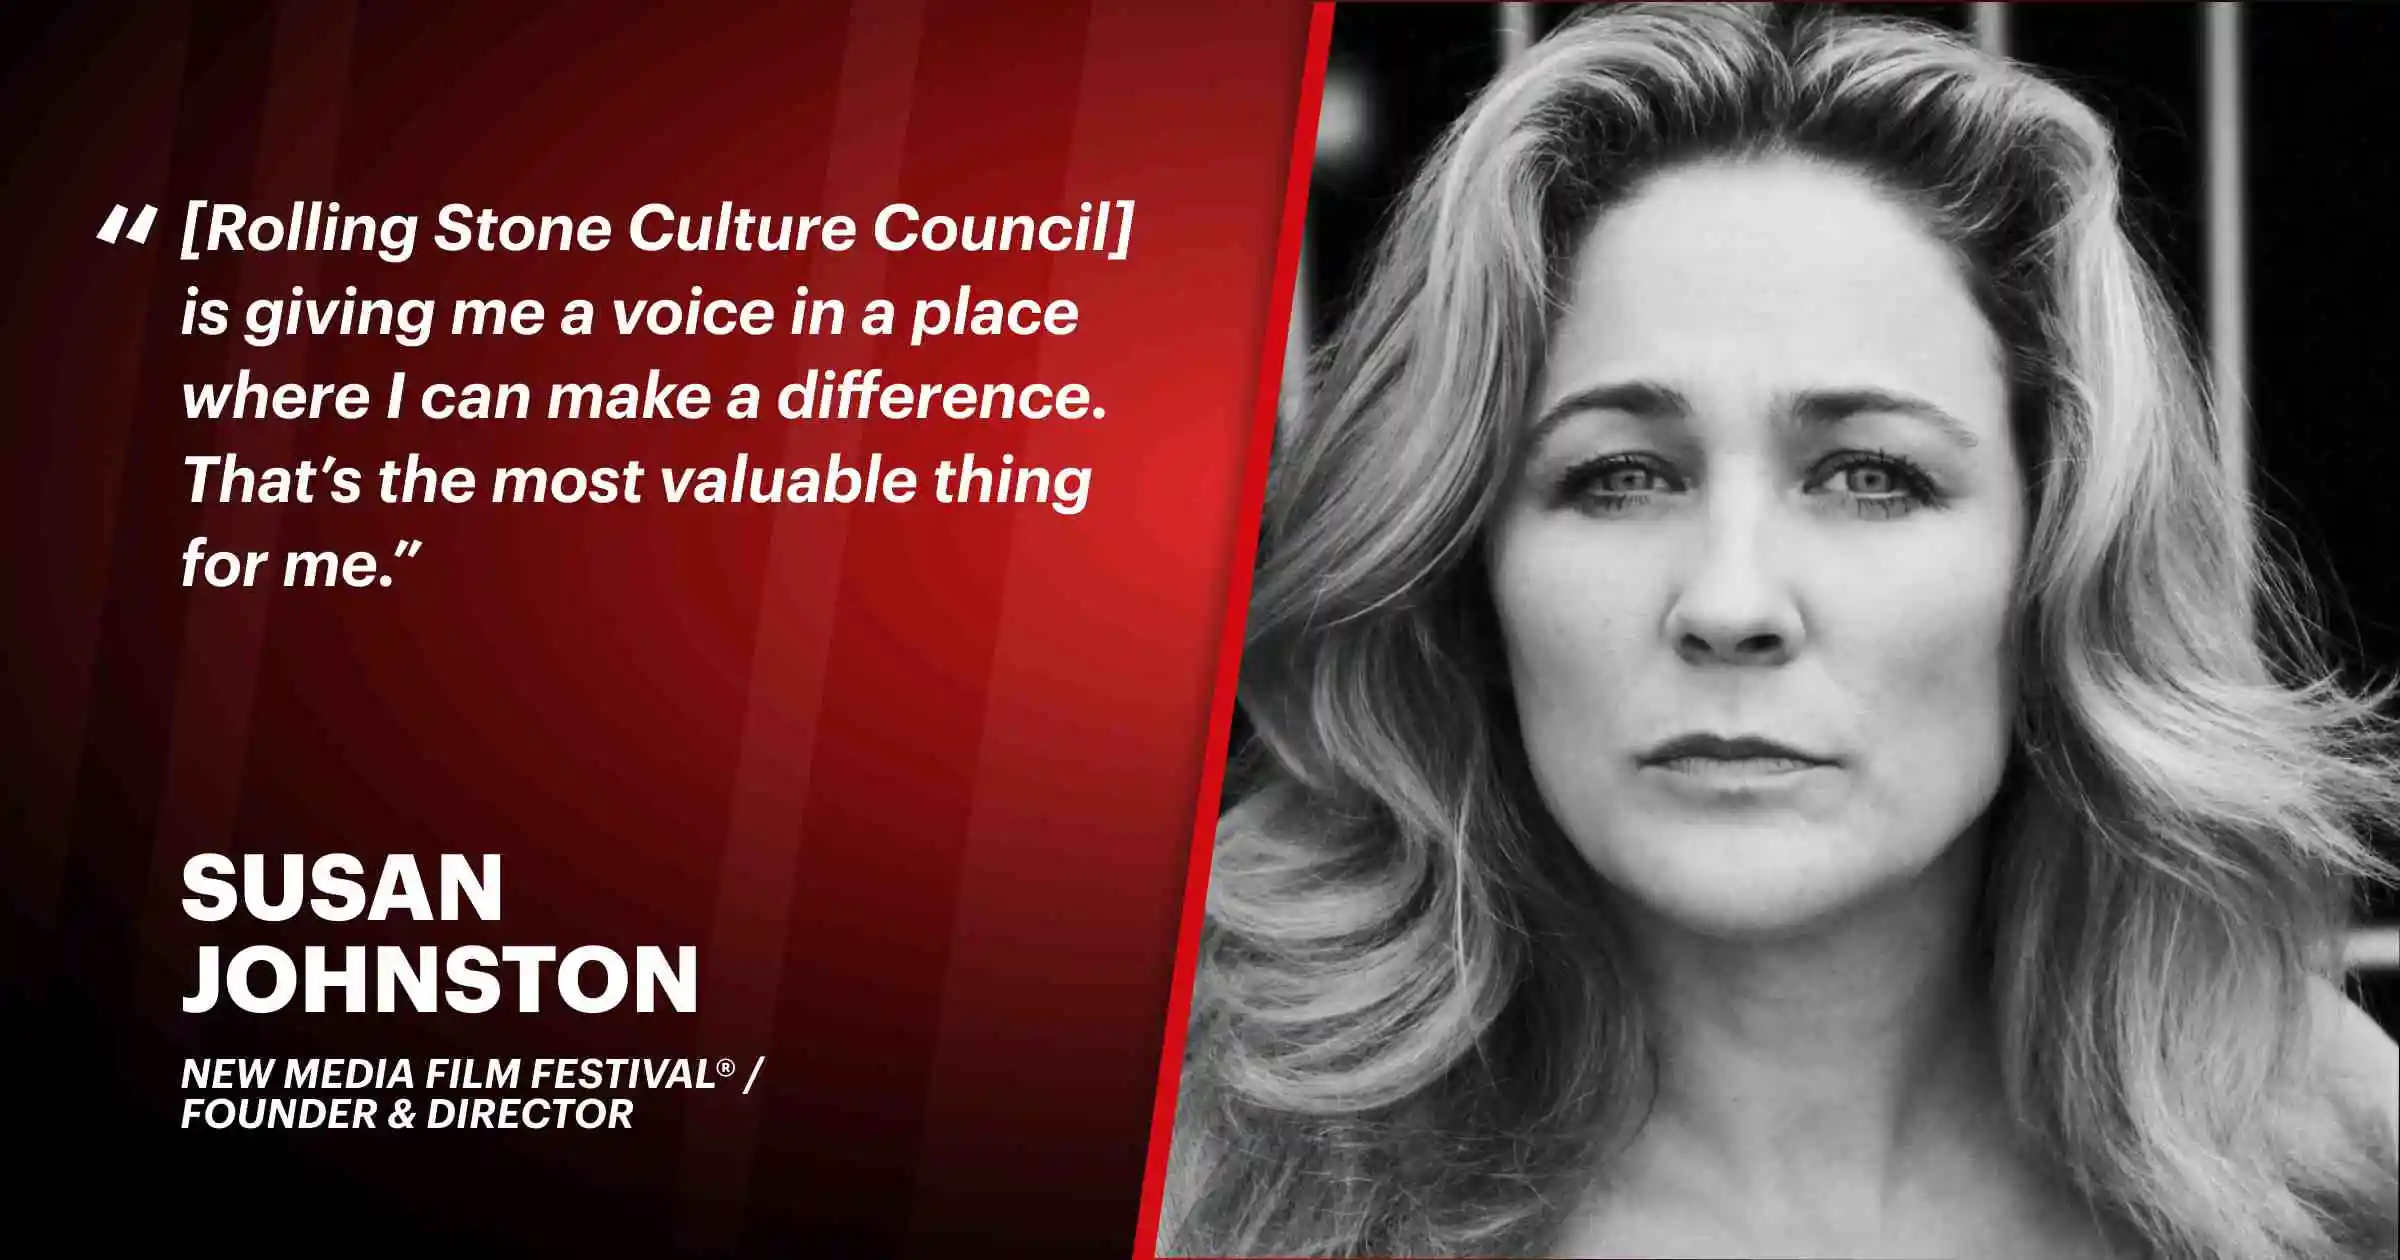 Rolling Stone Culture Council Elevates Susan Johnston As An Industry Thought Leader